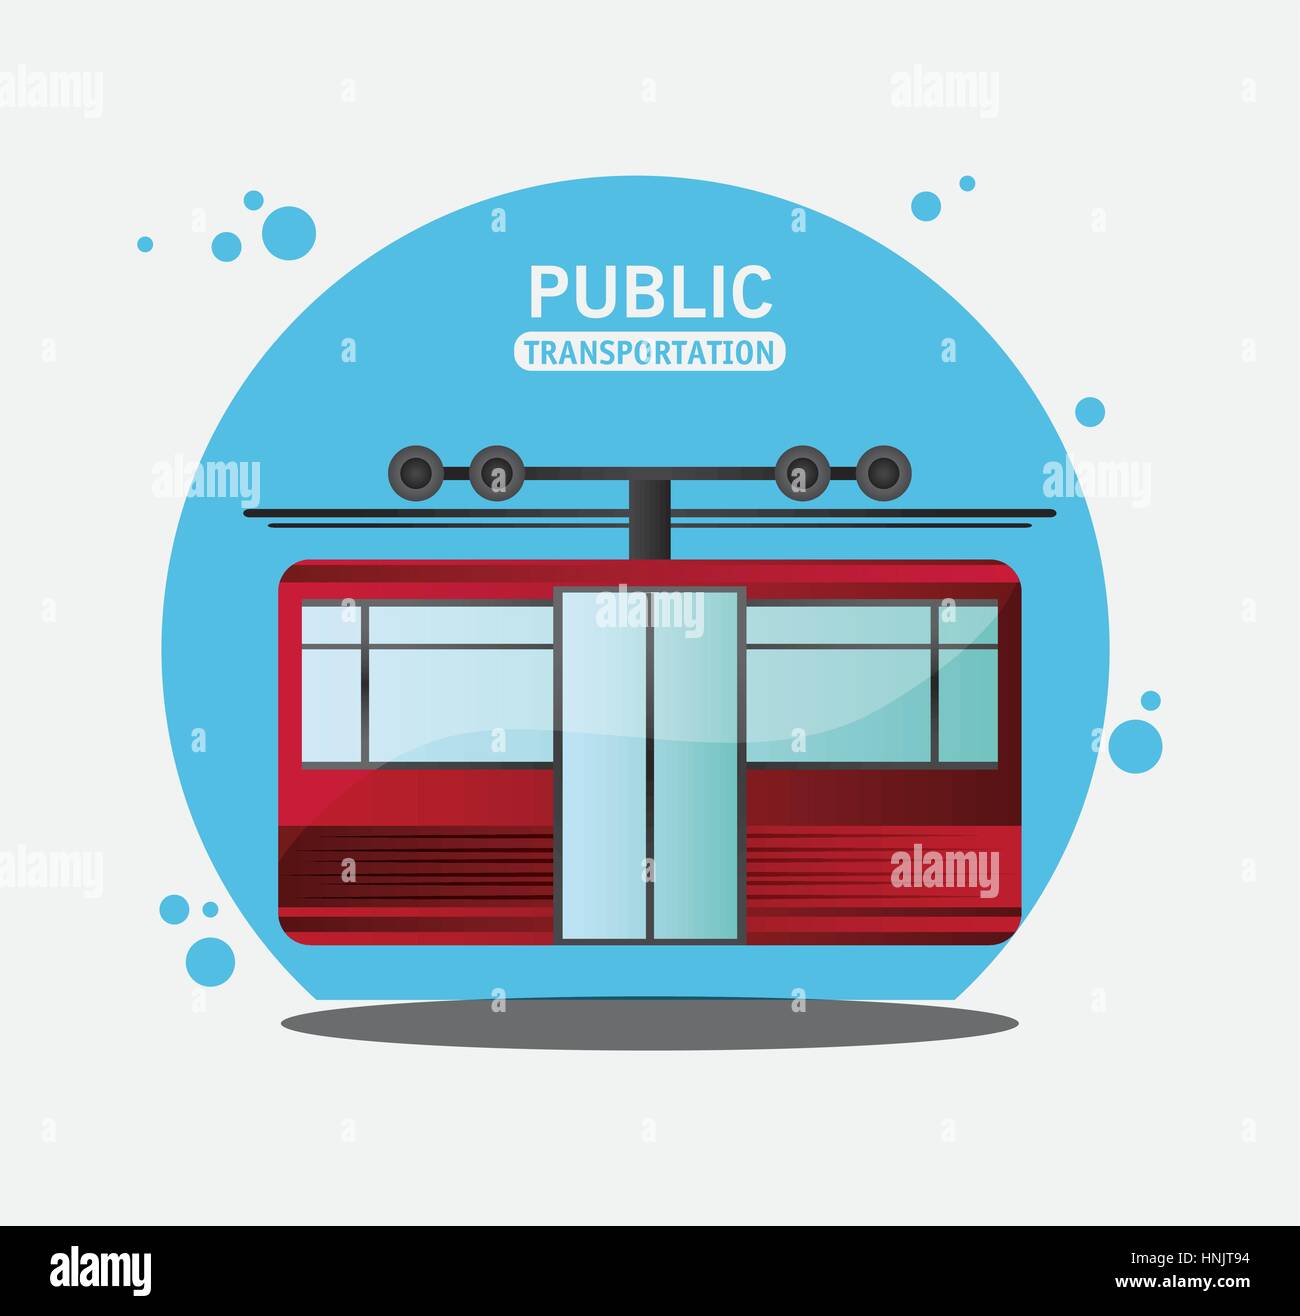 cable railway public transport vector illustration eps 10 Stock Vector